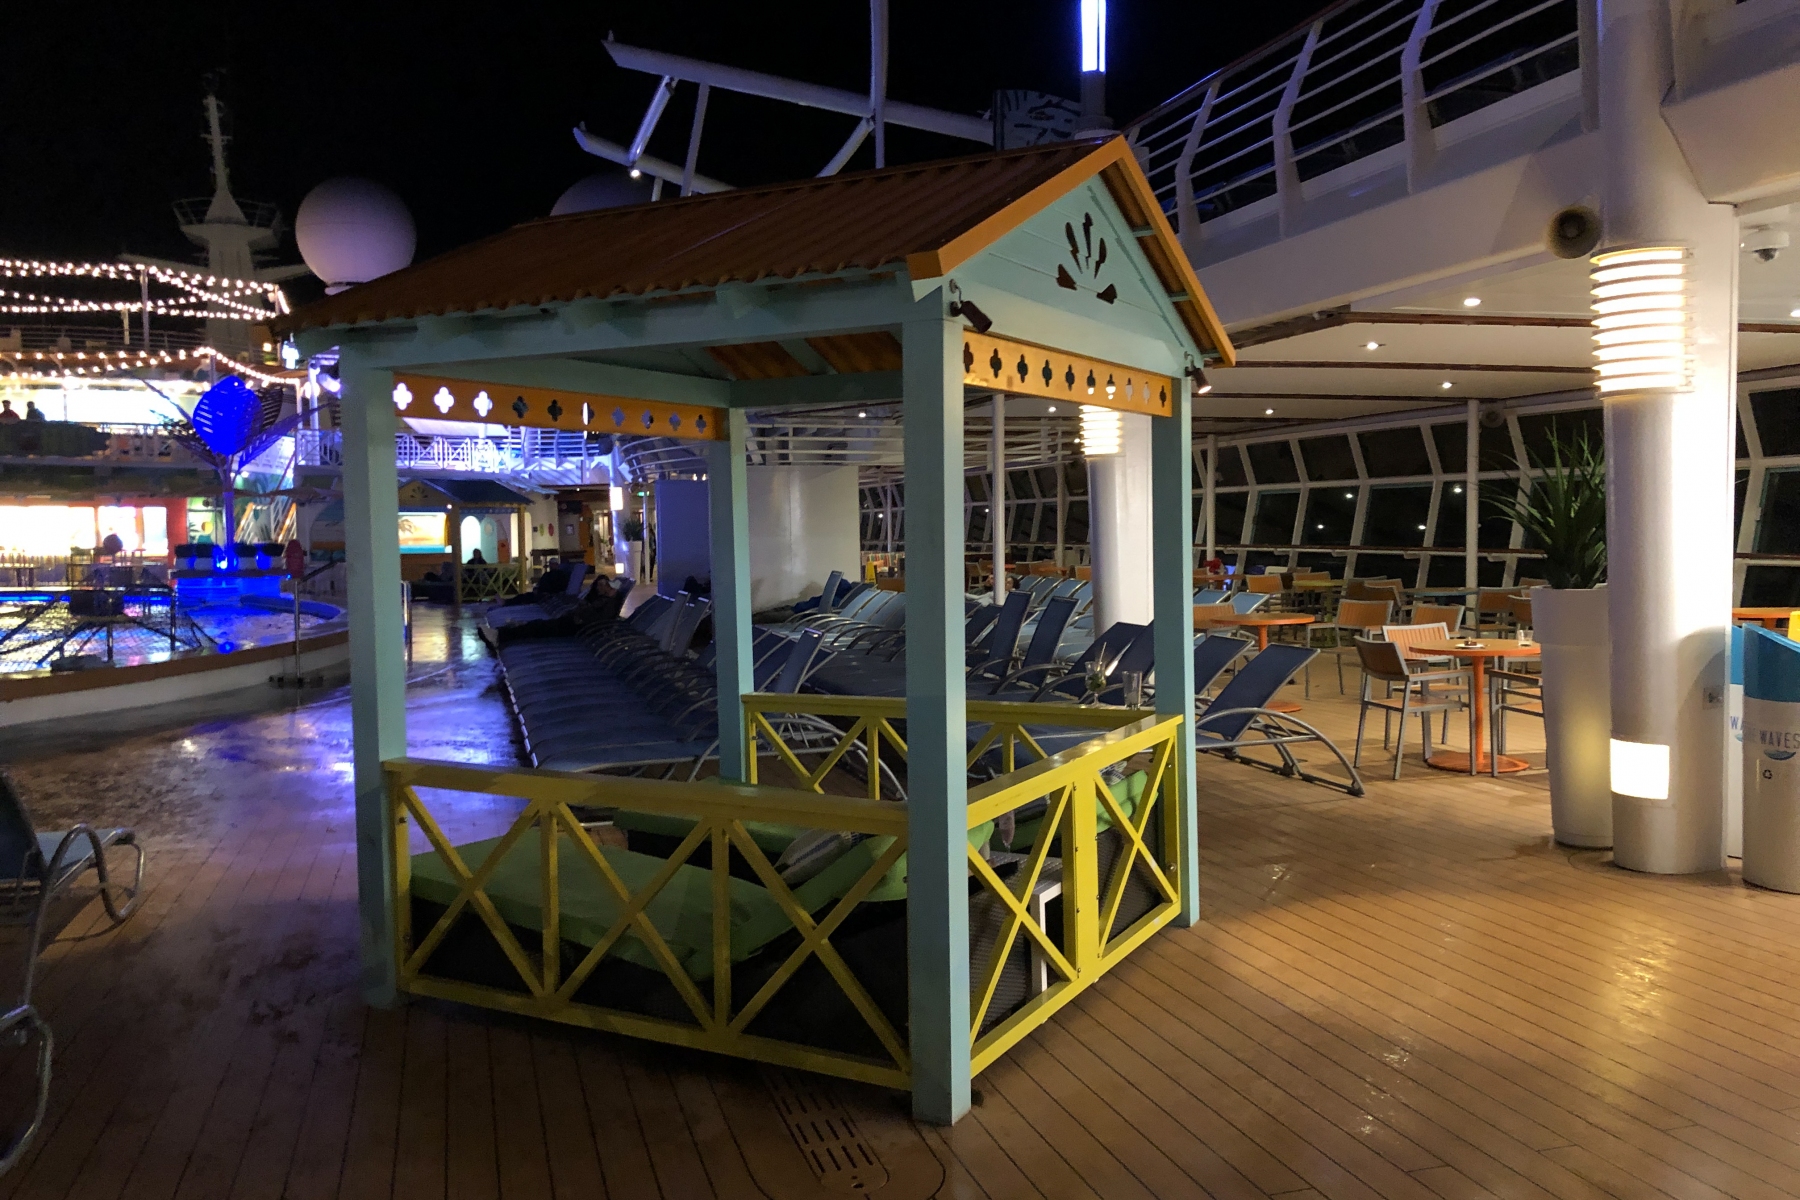 Navigator of the seas pool Deck at night on a cool rainy evening